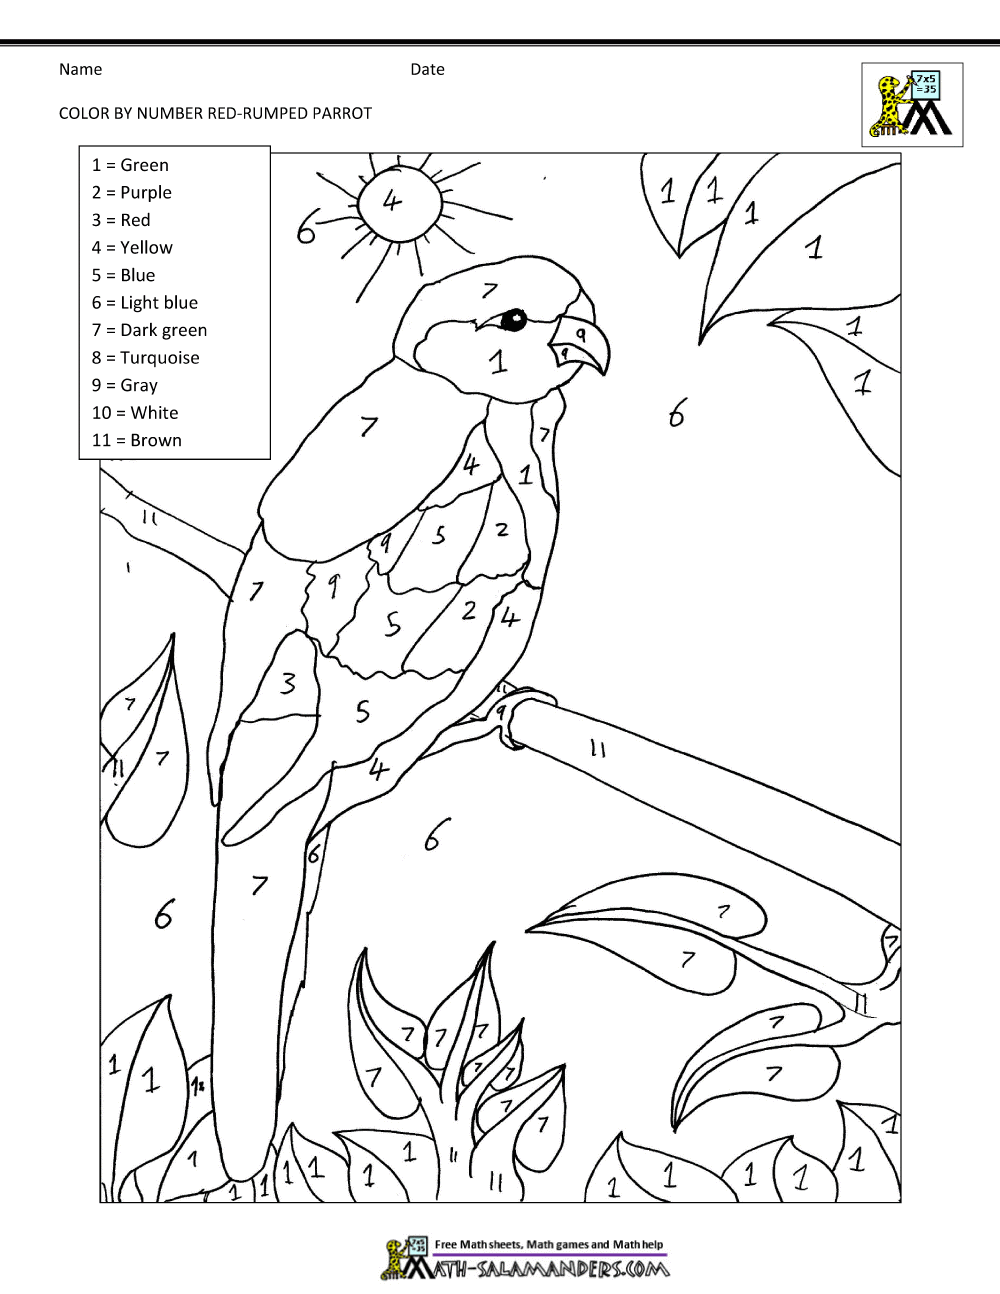 Red-rumped Parrot coloring #7, Download drawings